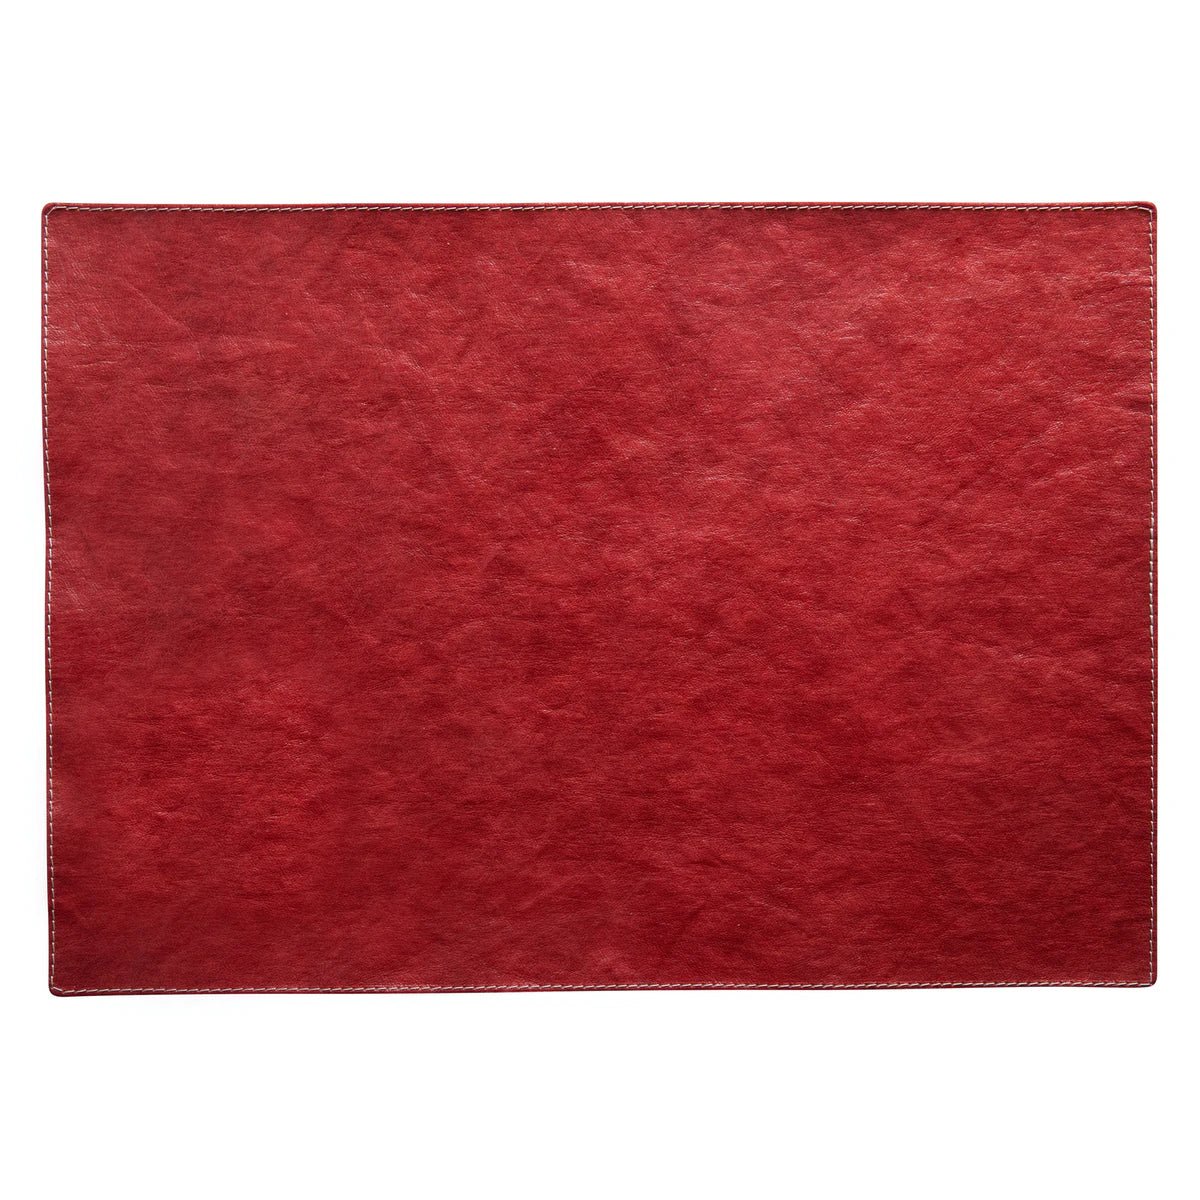 A rectangular washable paper placemat is shown. The placemat is red.